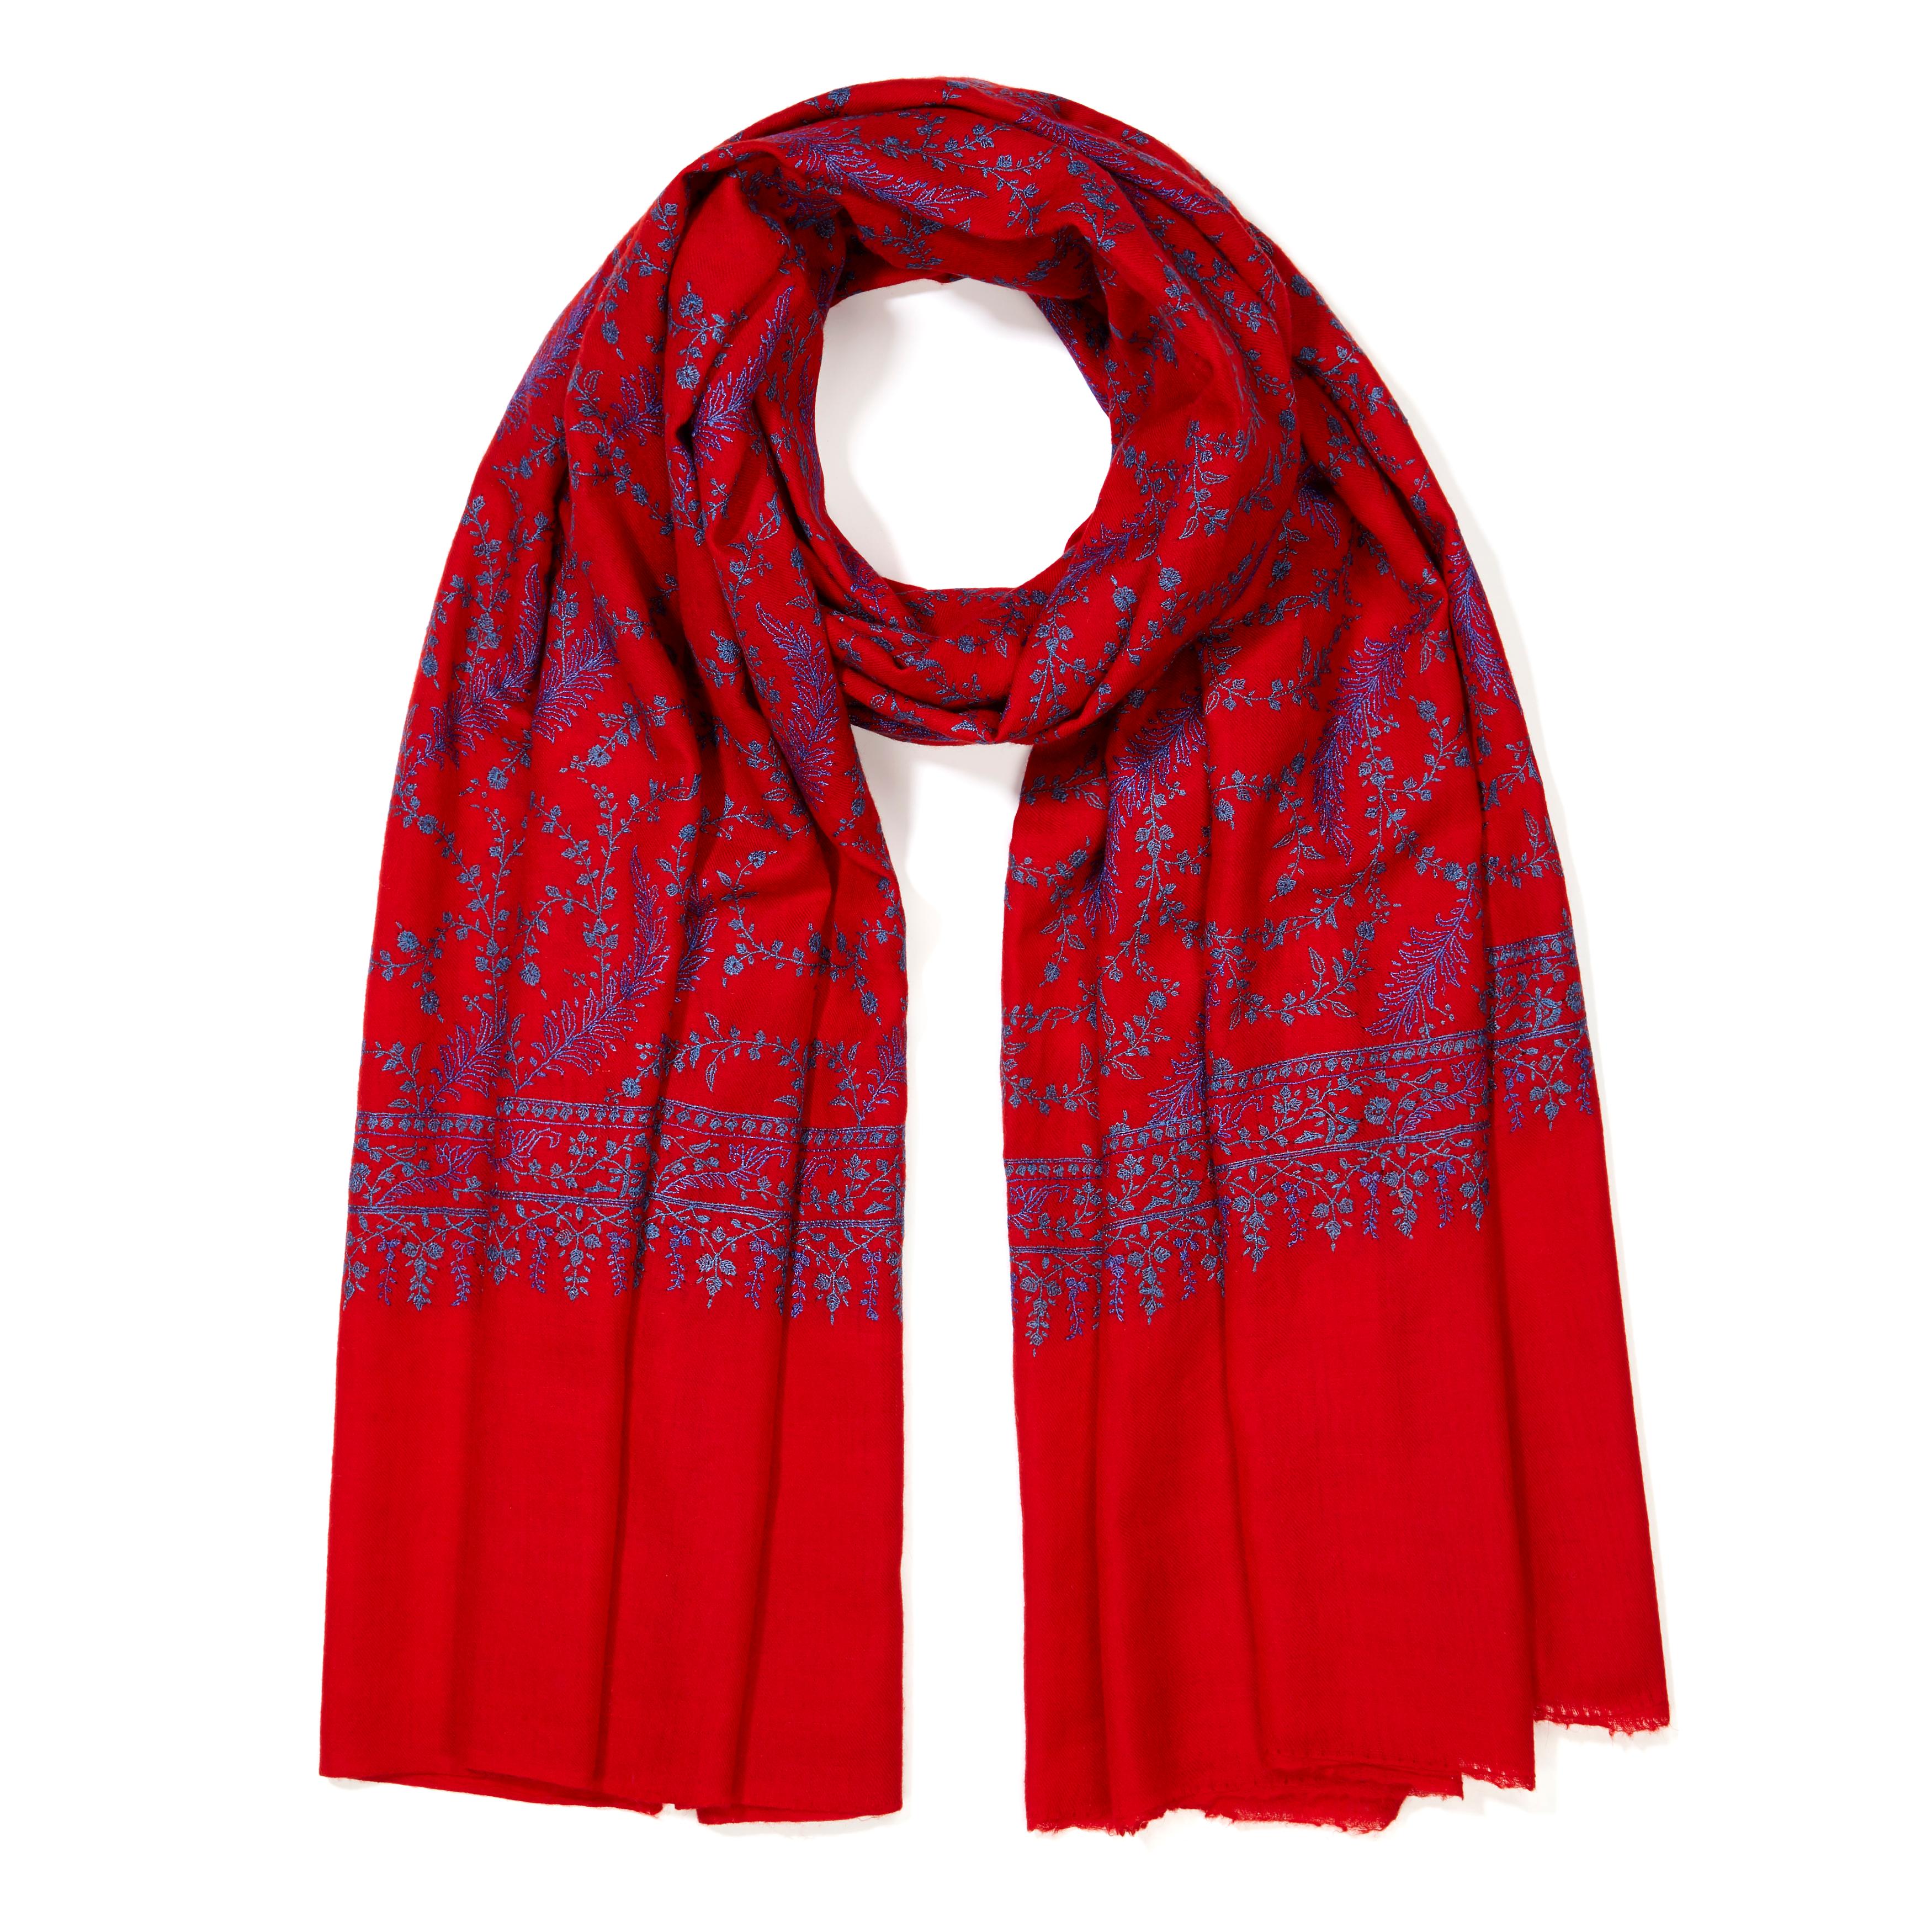 Women's or Men's High Quality Hand Embroidered 100% Cashmere Shawl in Red & Blue - New 